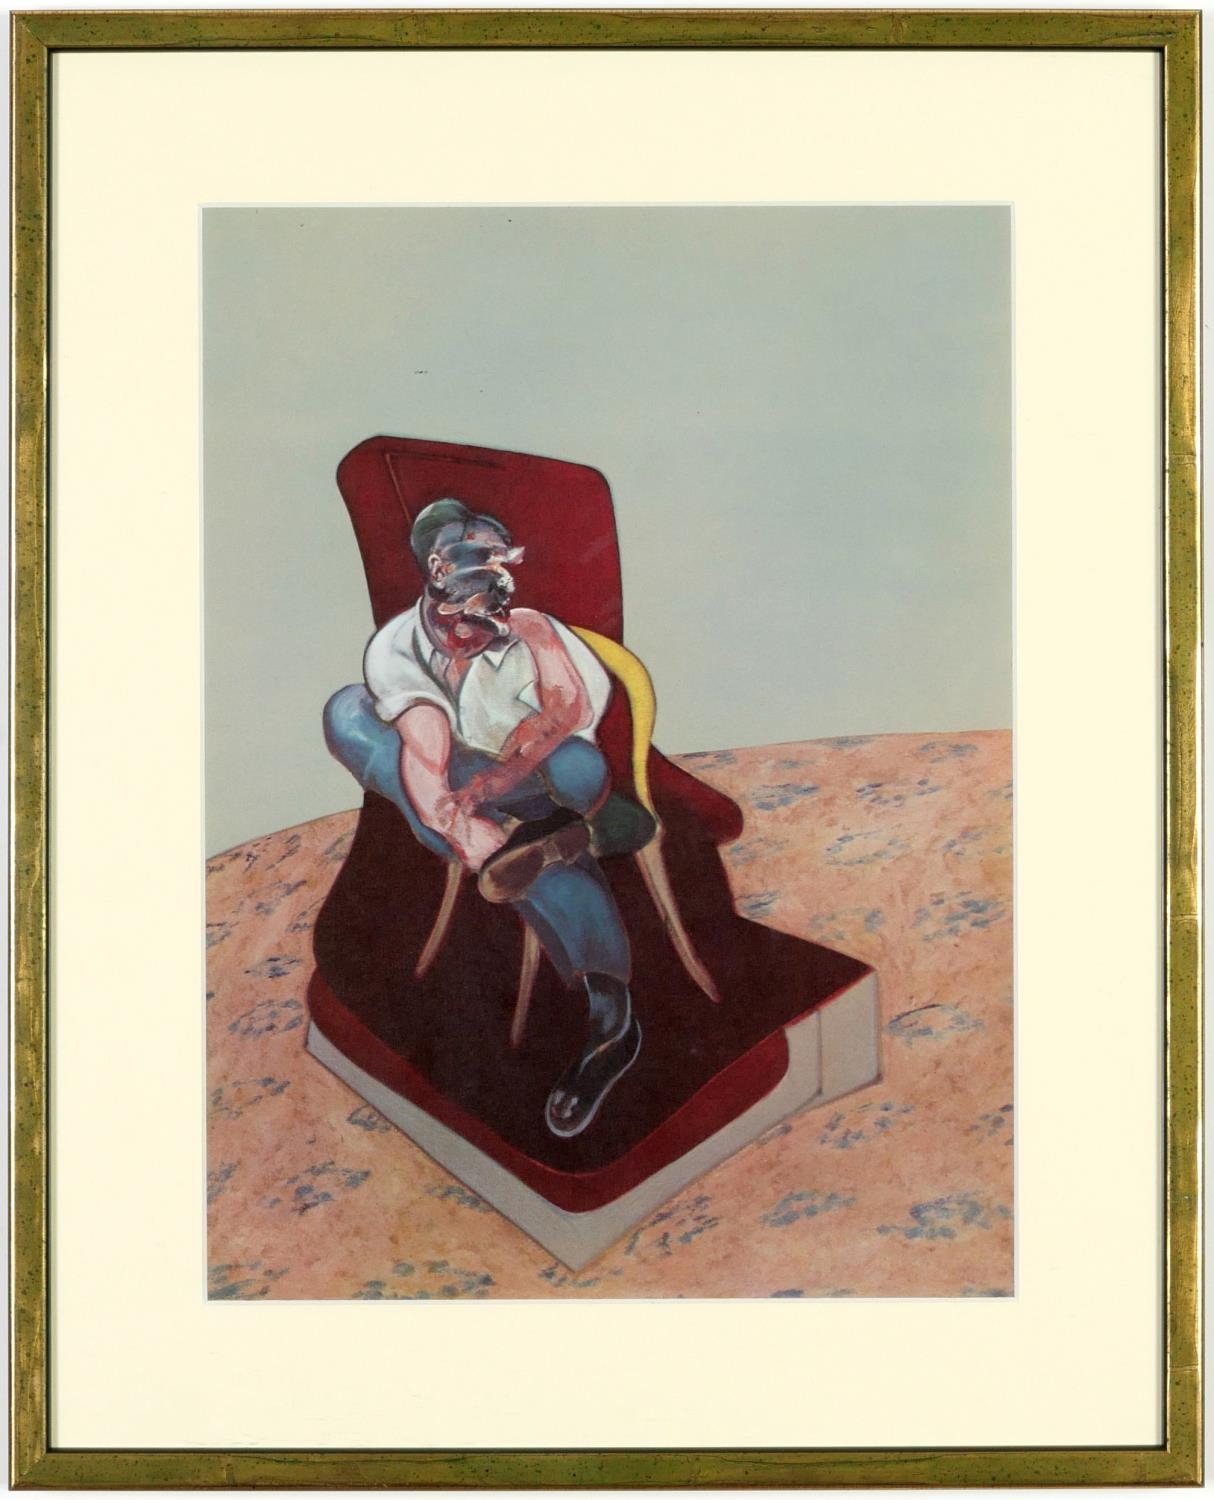 FRANCIS BACON, Portrait of George Dyer, a set of three off set lithographs, printed by Maeght 1966 - Image 2 of 4